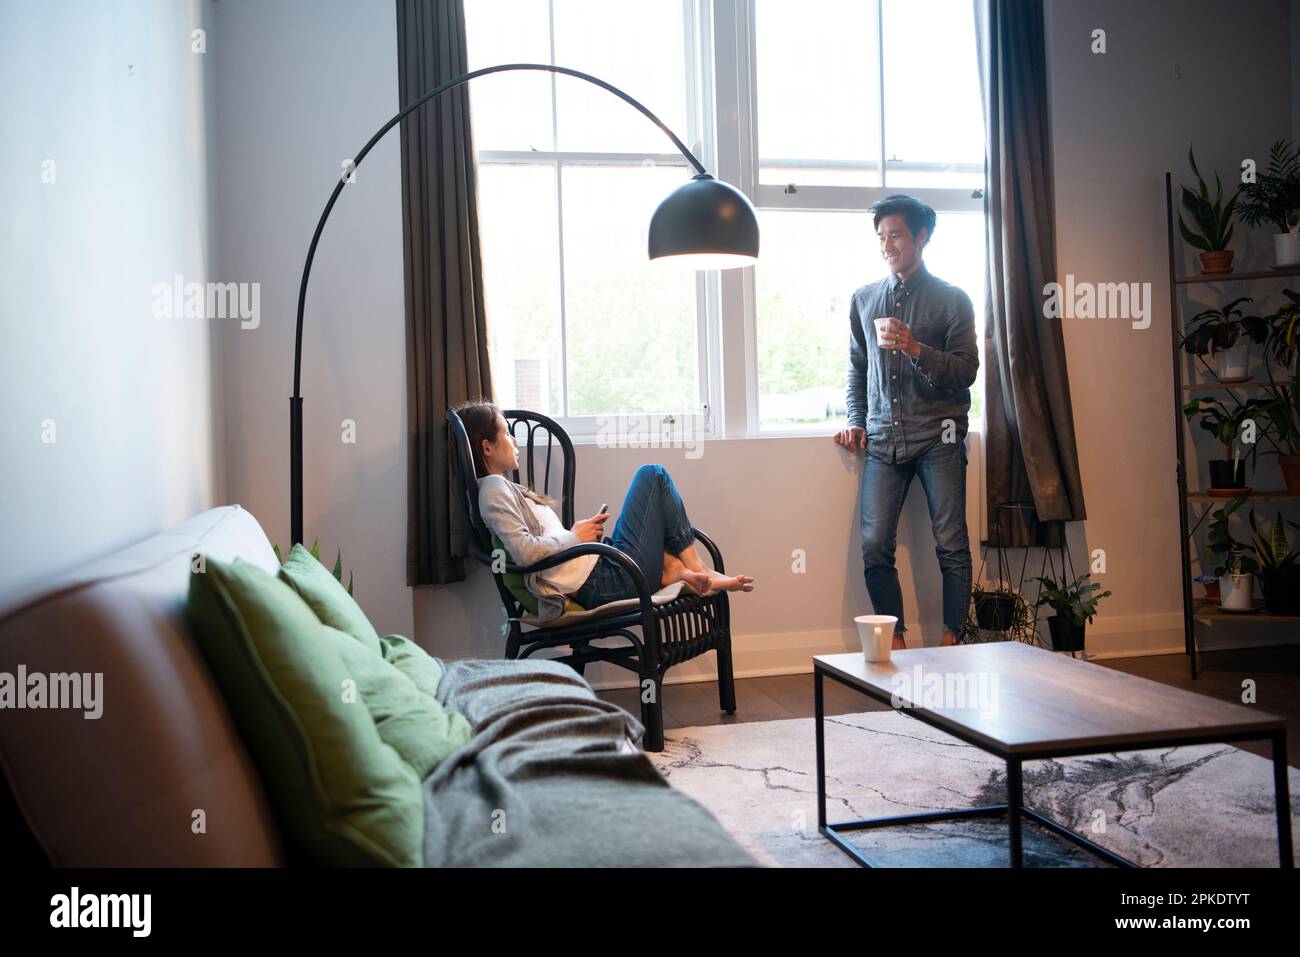 Couple relaxing in living room while talking Stock Photo